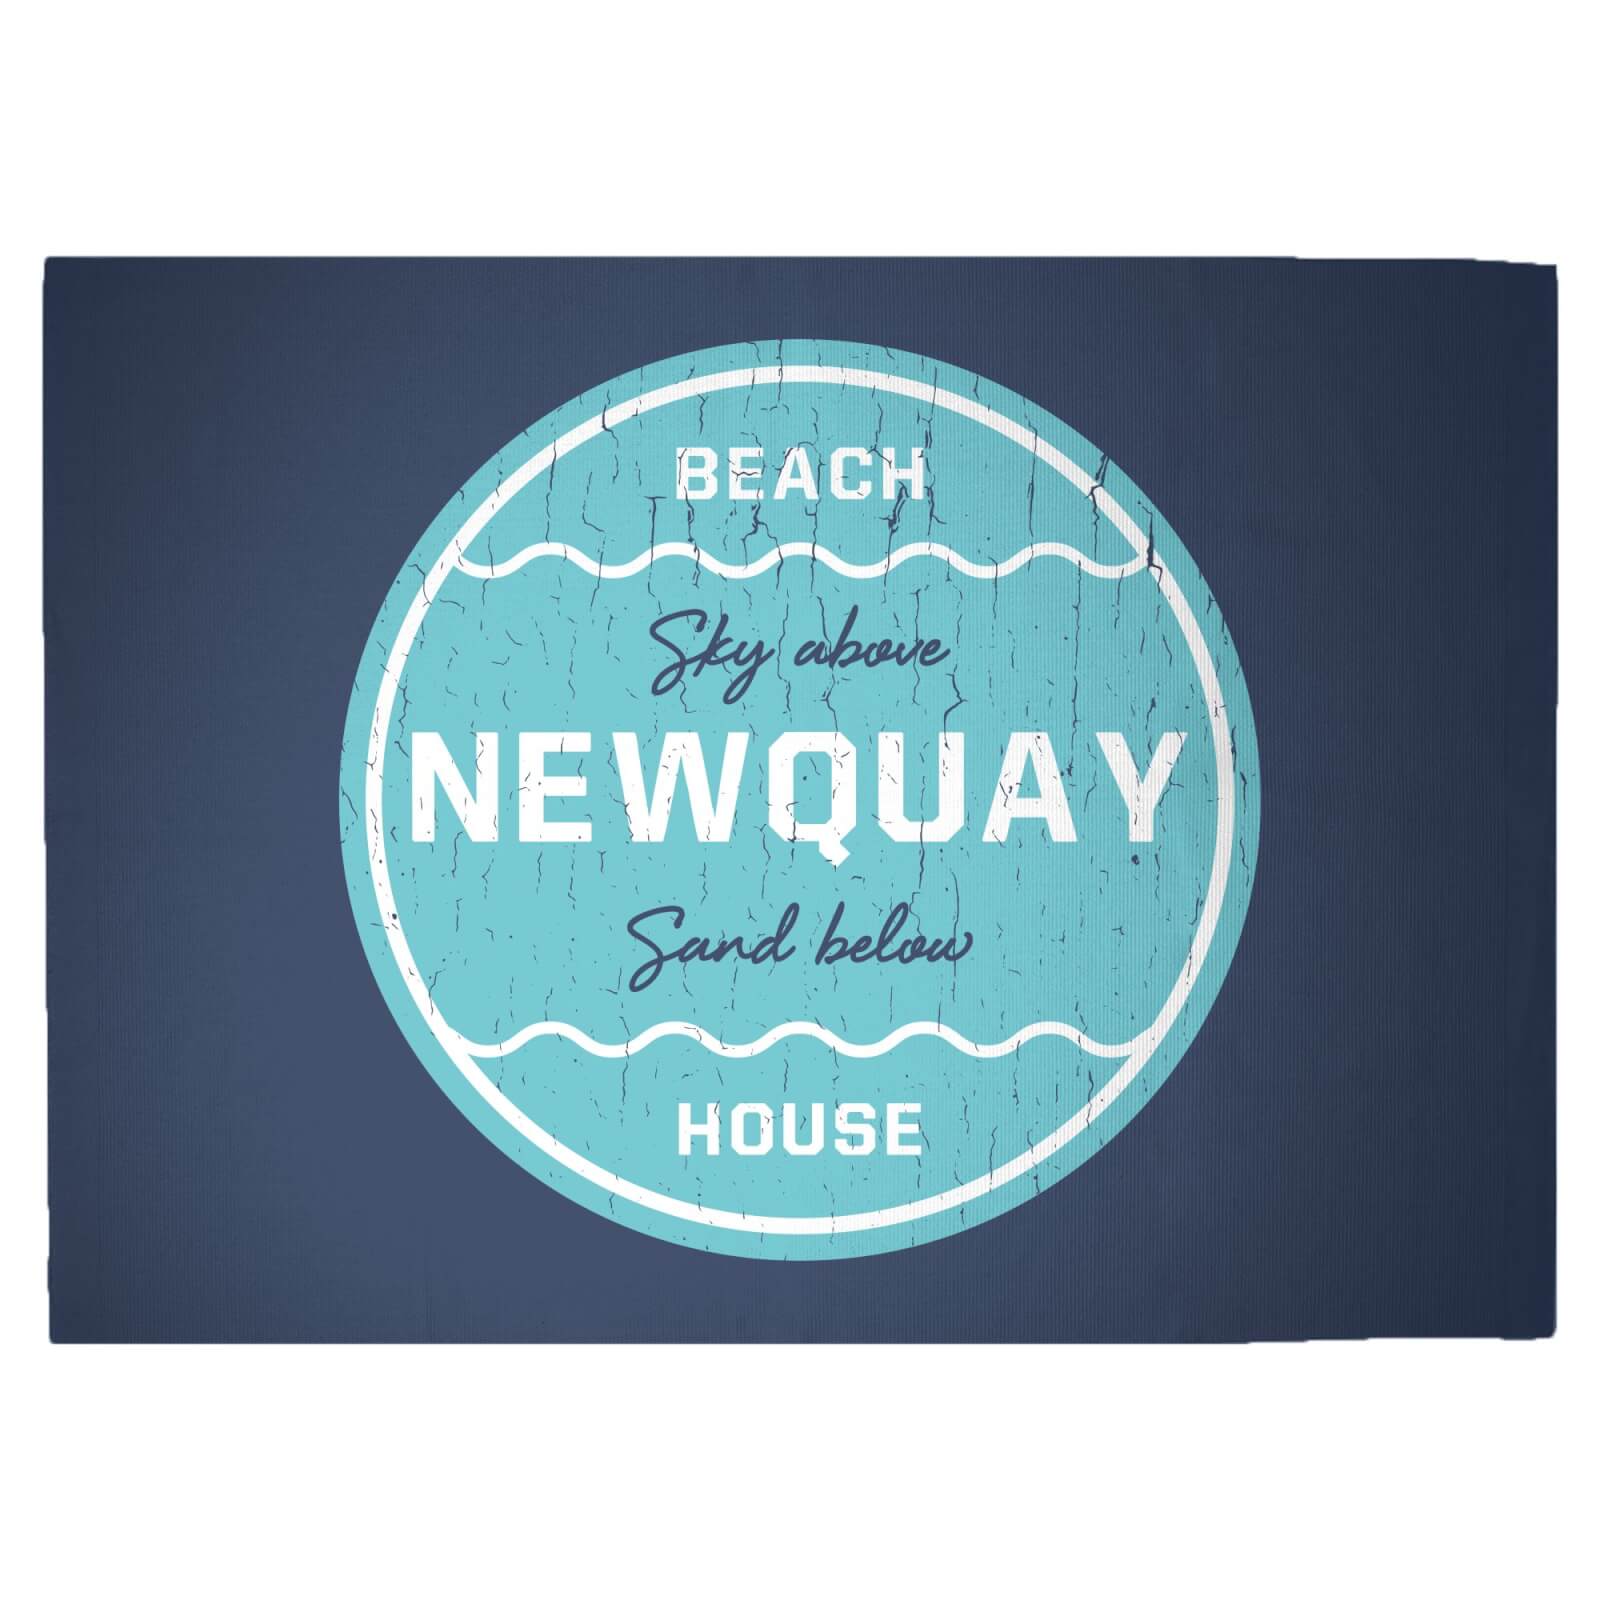 Newquay Beach Badge Woven Rug - Large